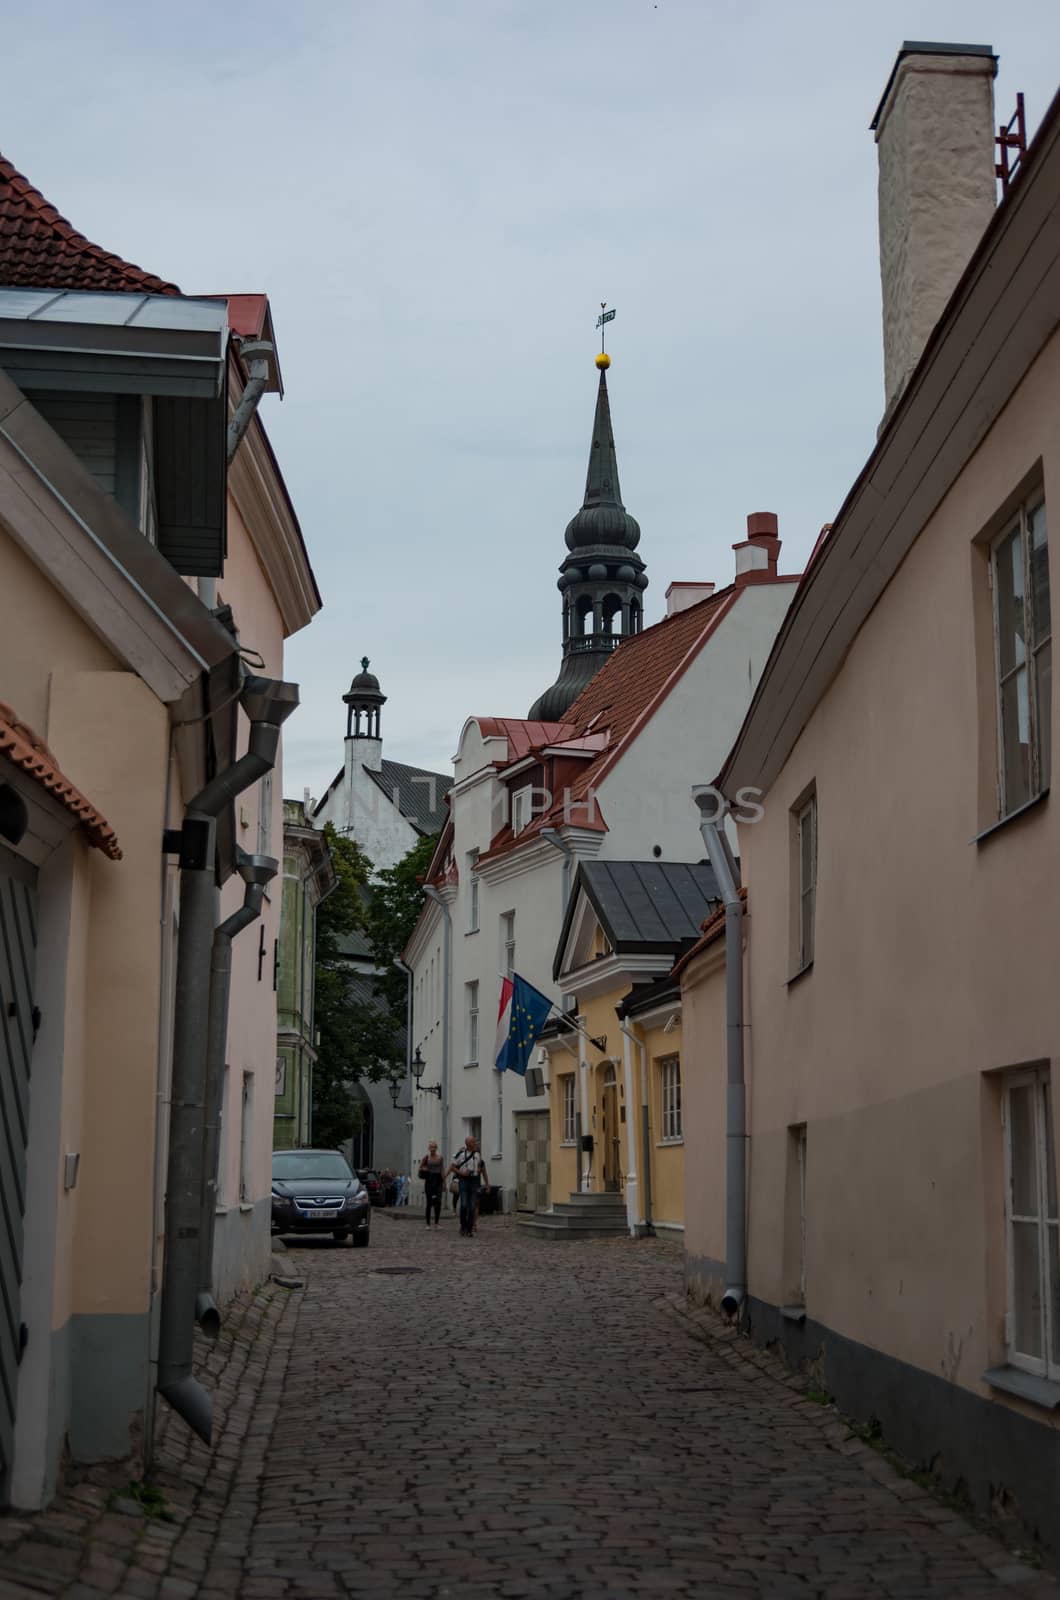 Tallinn, Estonia - July 29, 2017: Narrow street in the old town on Toompea Hill of Tallinn with St Mary's Cathedral (Dome Church) at background, Estonia